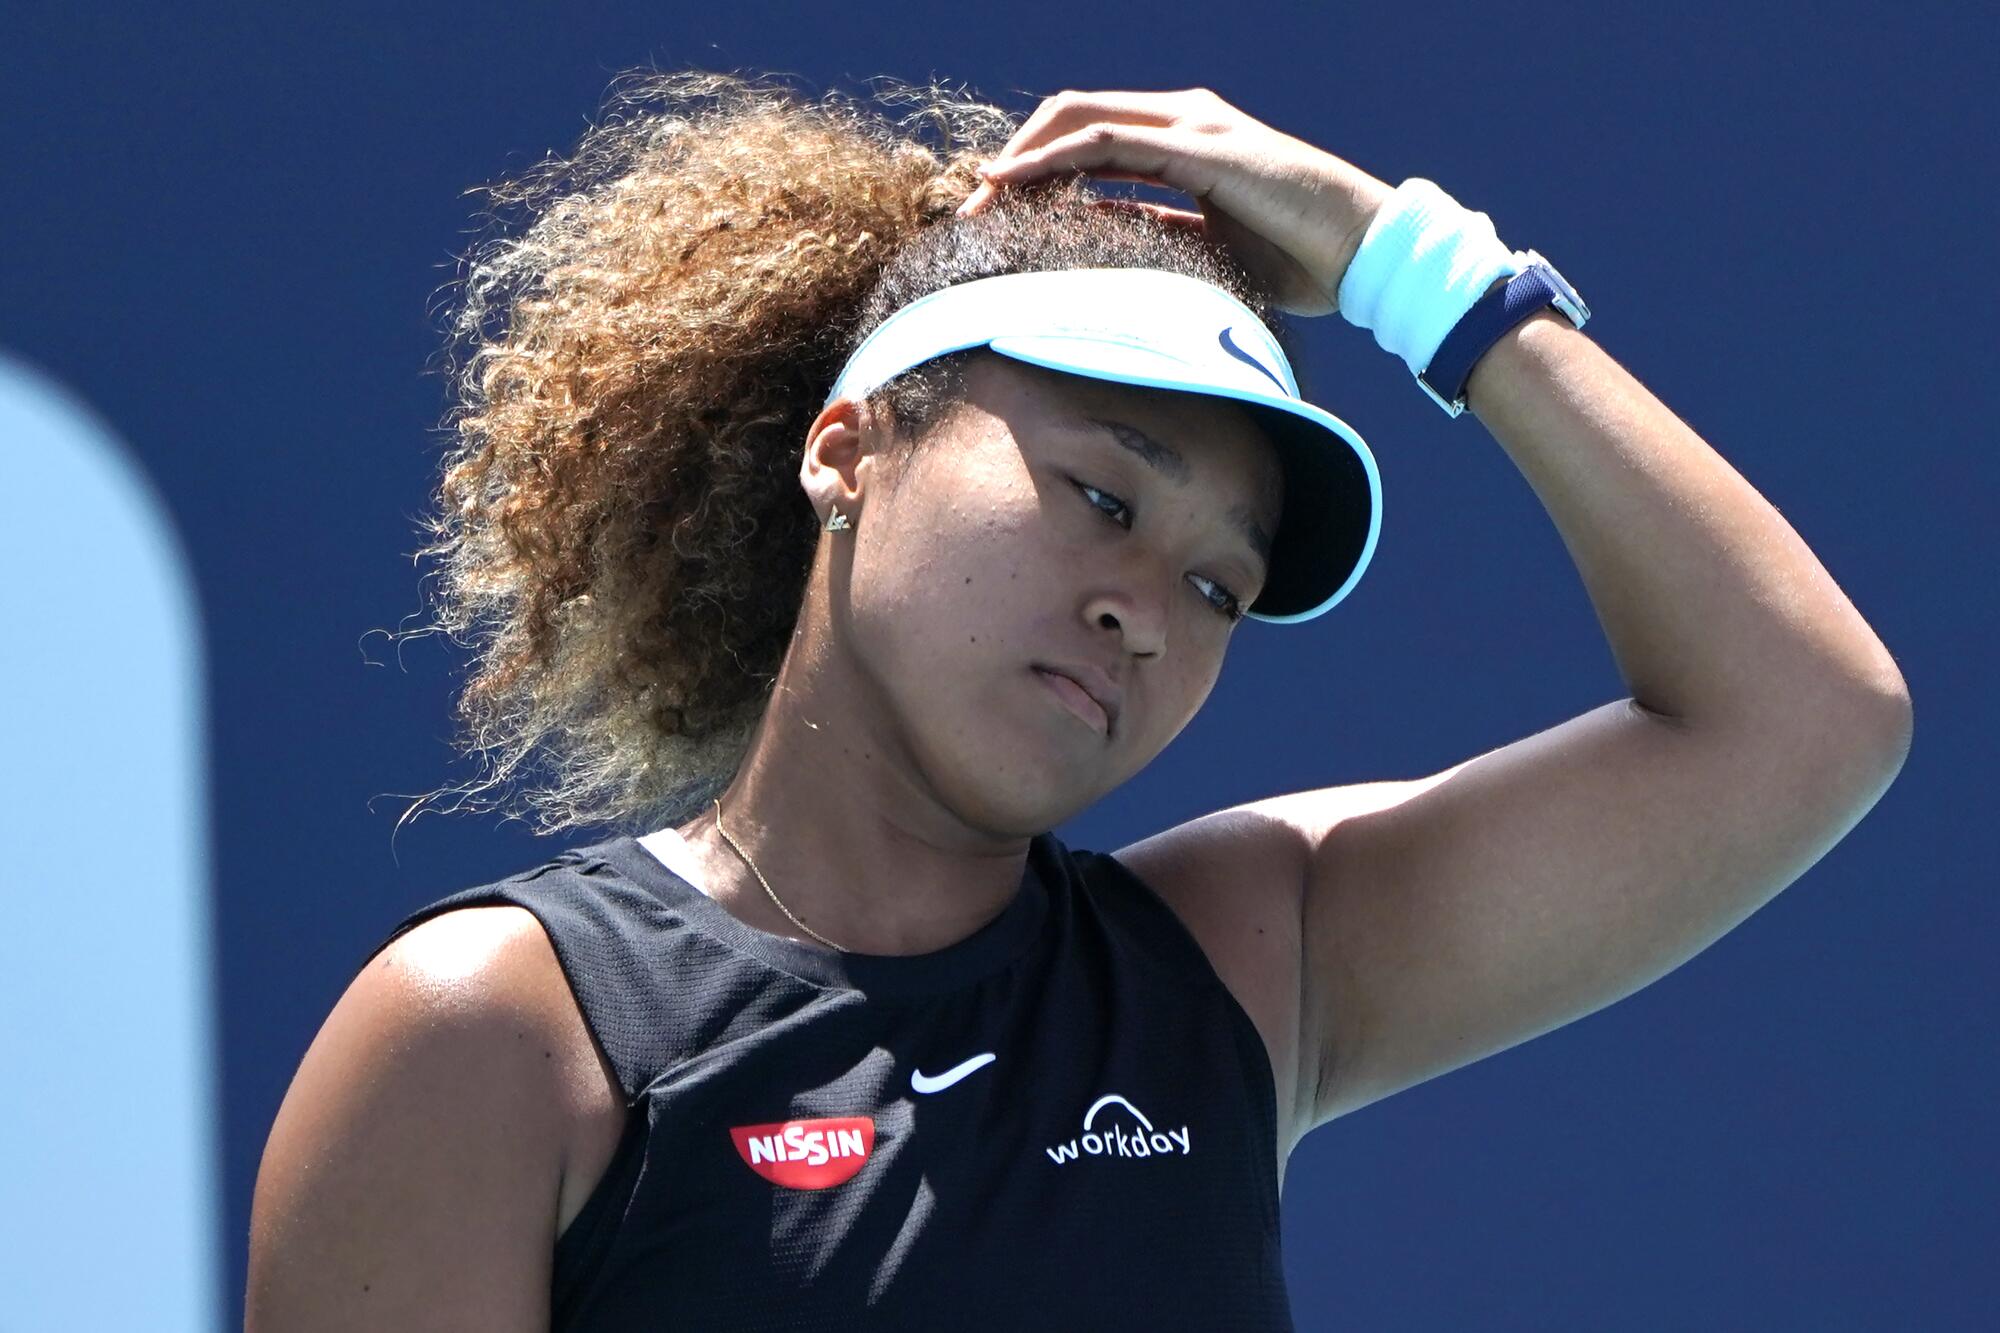 Naomi Osaka reacts during at match at the Miami Open in March.